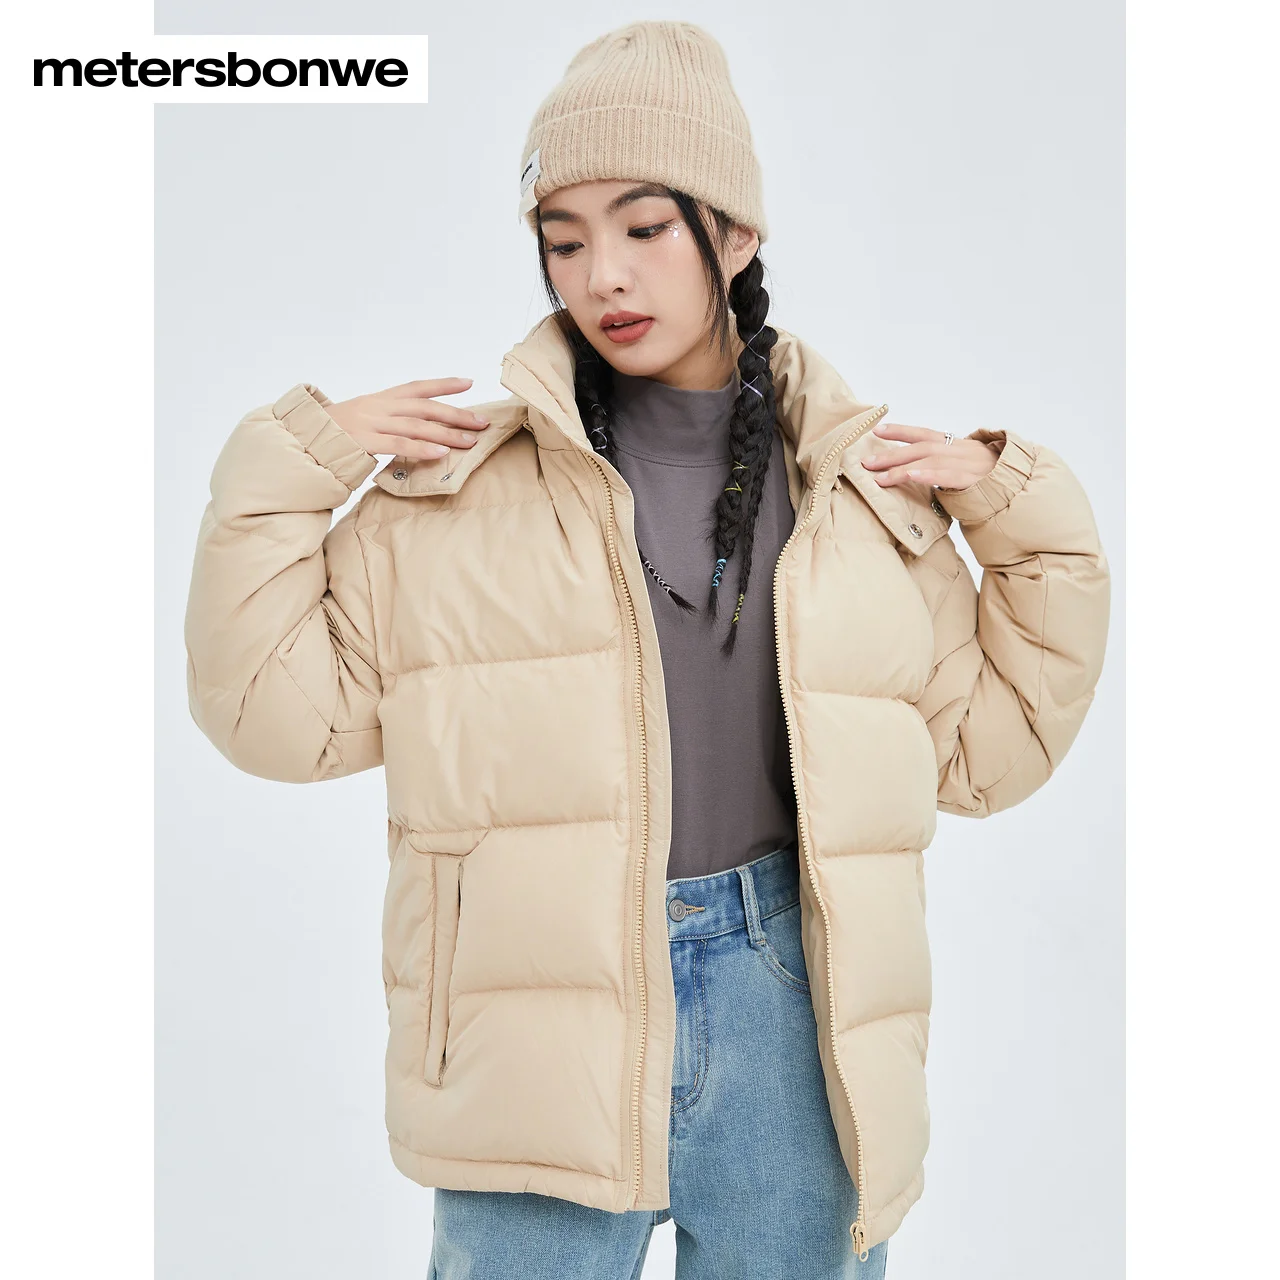 Metersbonwe Men's And Women's Basic Embroidered Down Jacket Solid Color Thick Hooded Warm Wear Couple Trend Loose Outwear